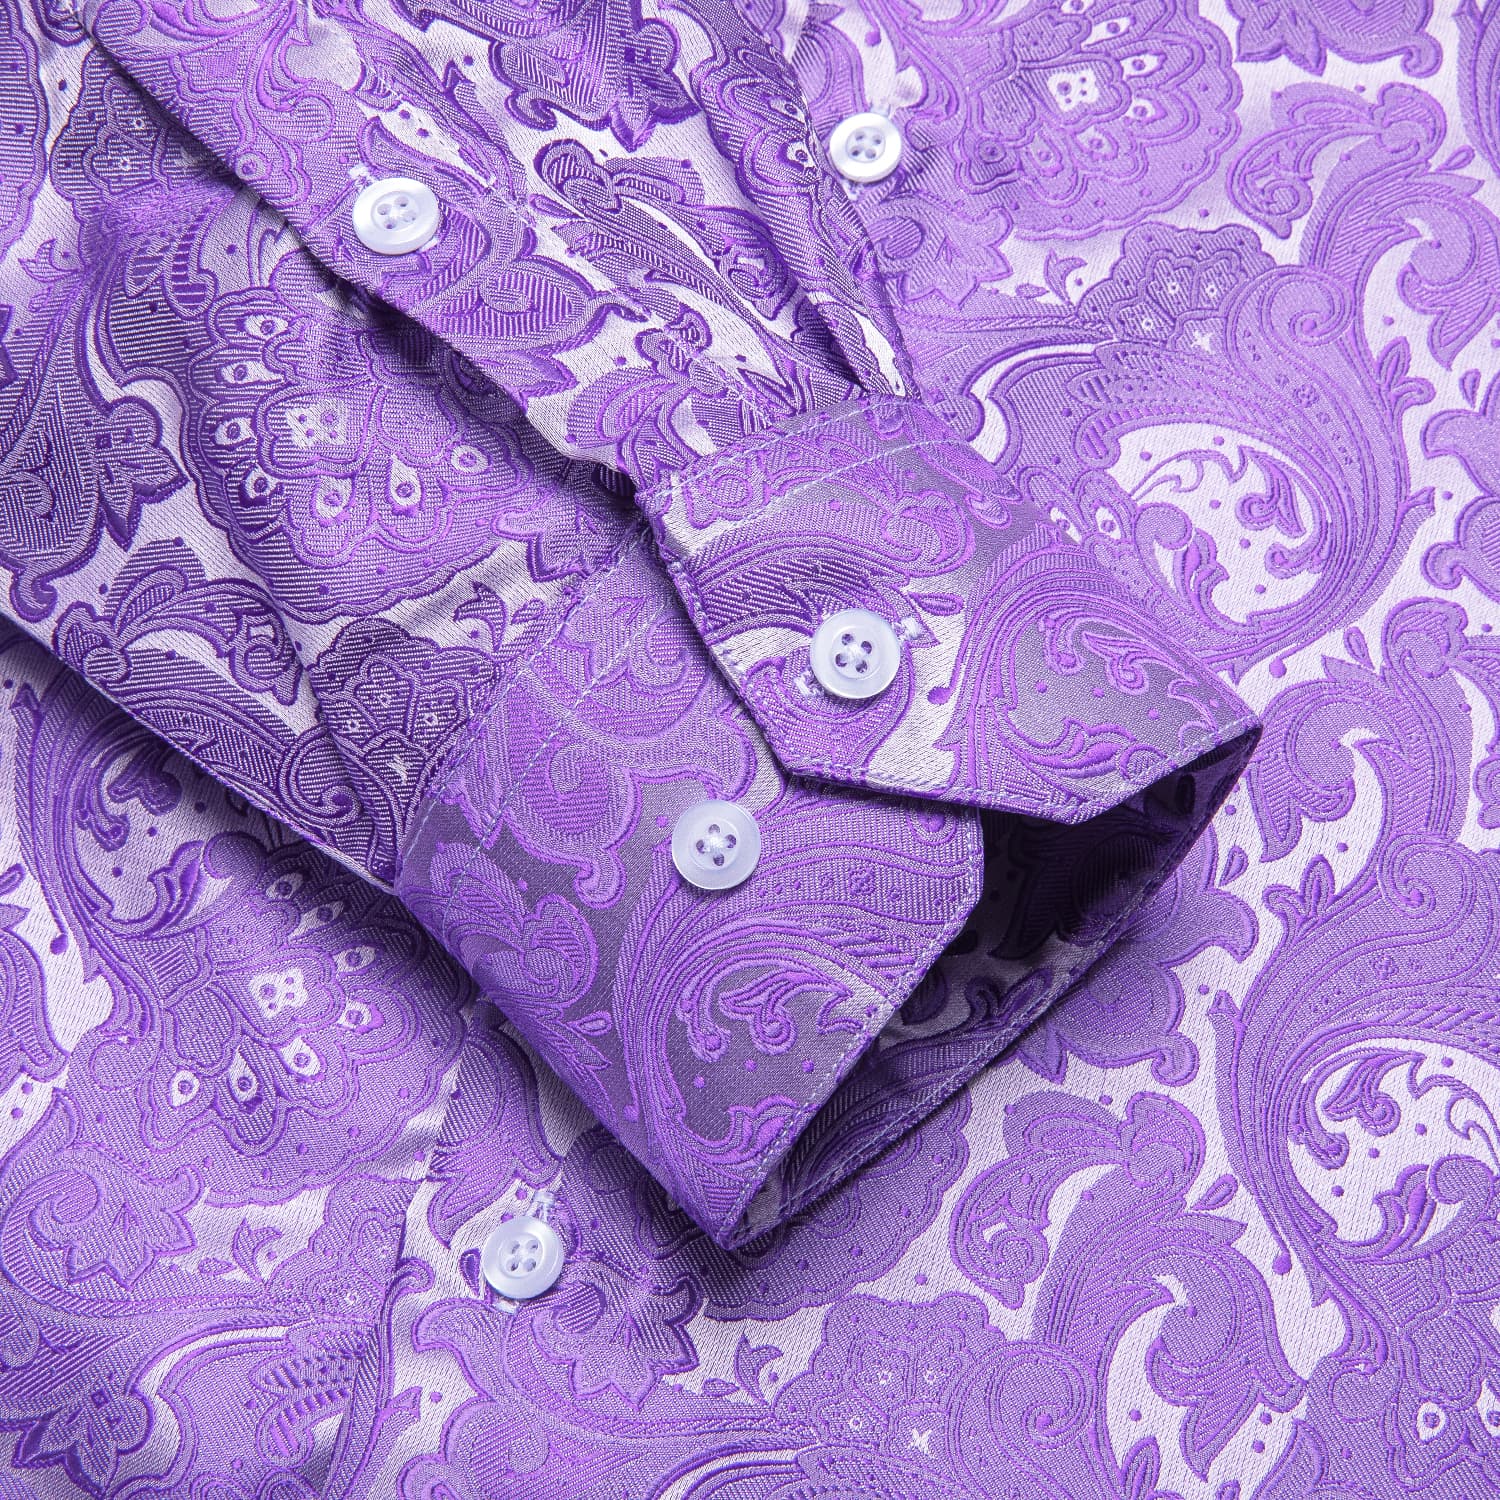 Sleeve button details for purple paisley shirt